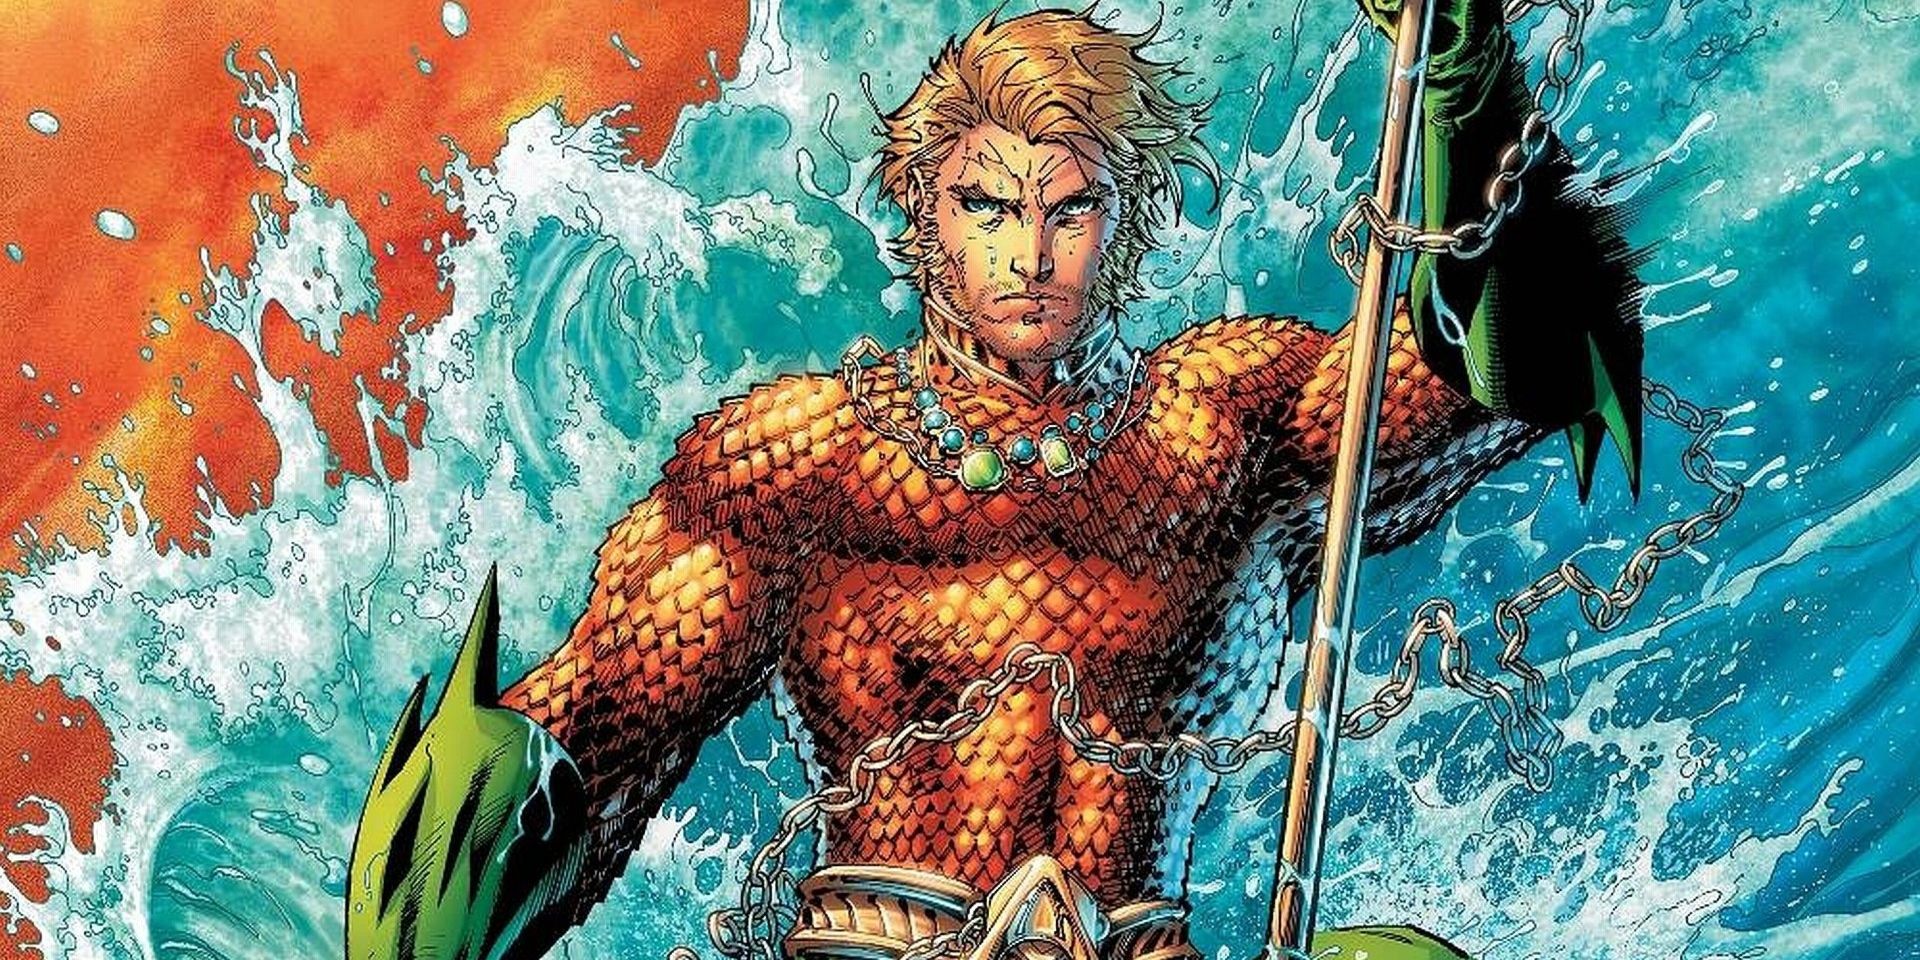 Aquaman from DC, the King of the Sea